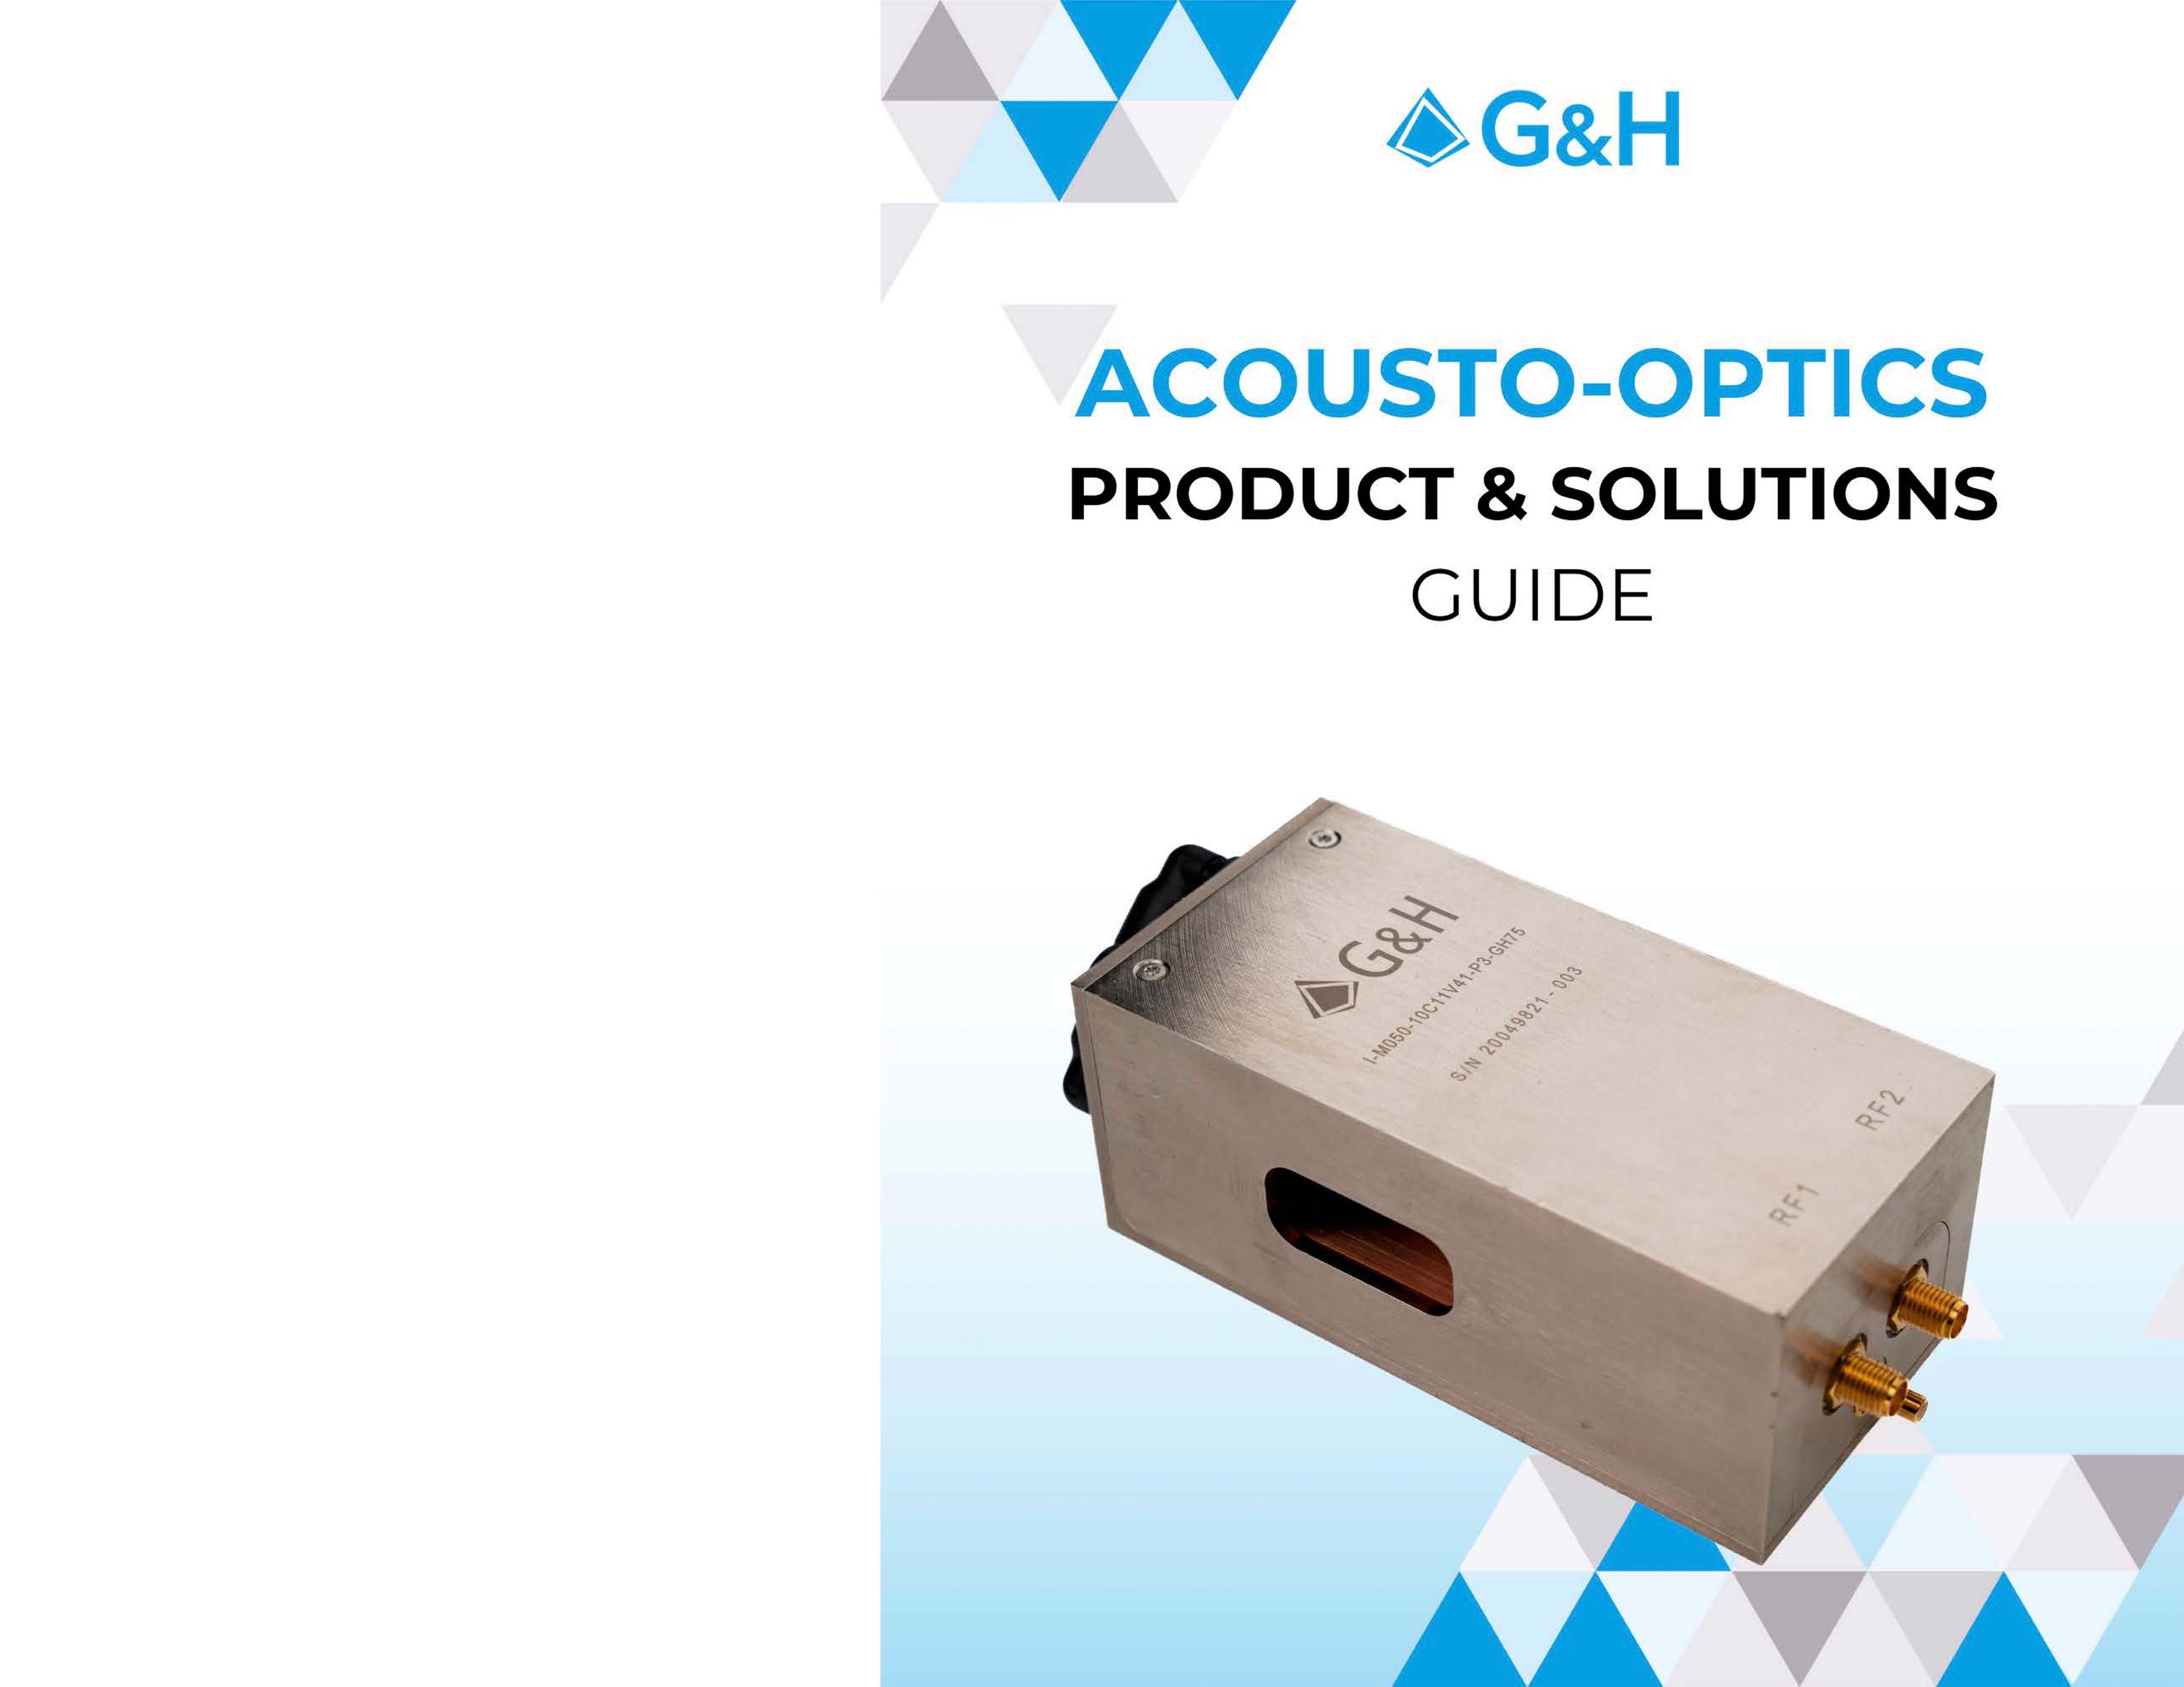 G&H Product & Solutions Guide - Acousto-Optics Page 01